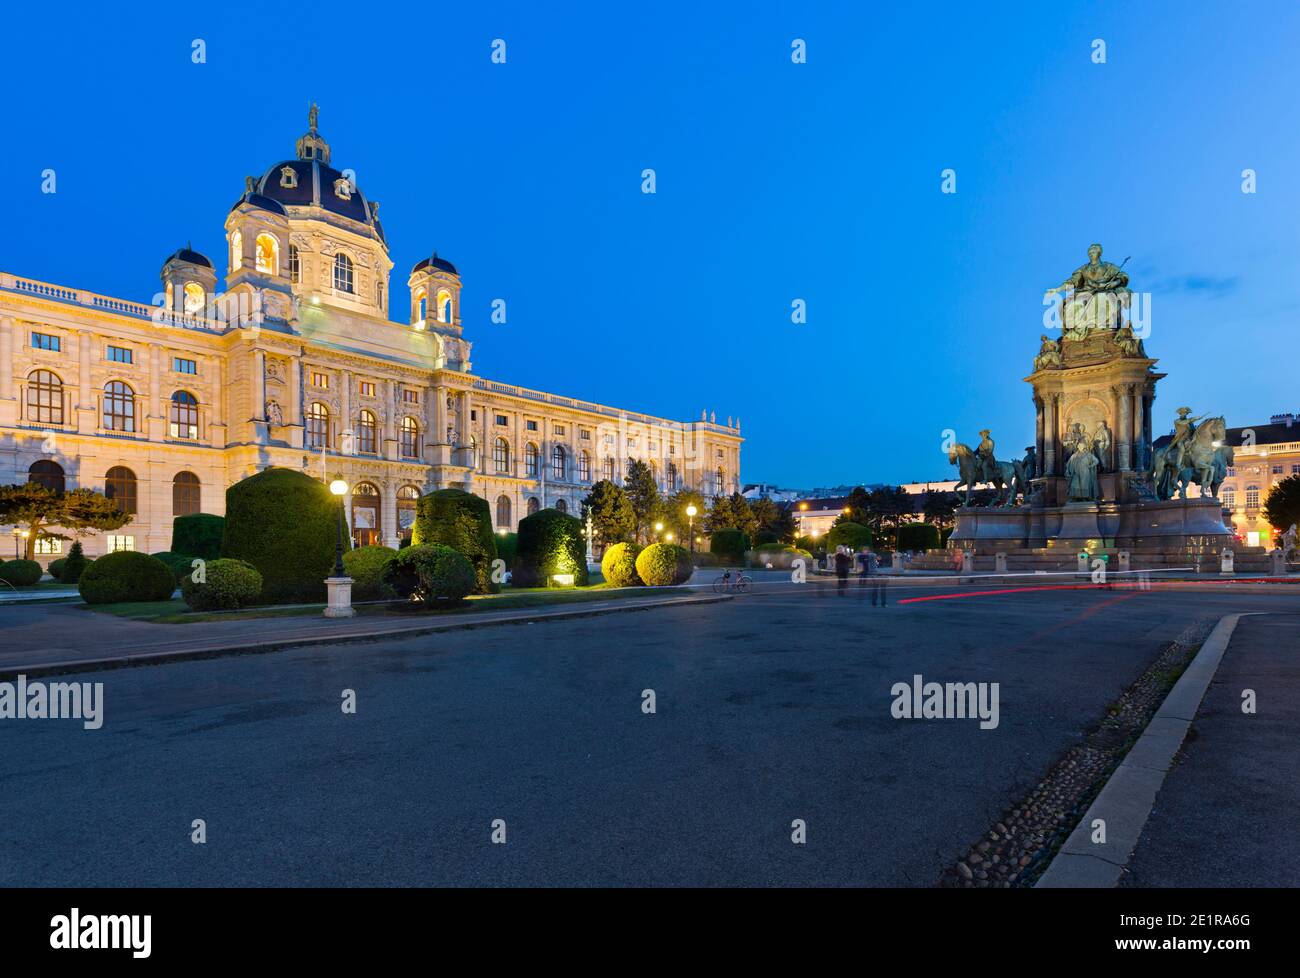 The Kunsthistorisches Museum (Museum of Fine Arts) in Vienna, Austria at night with the Maria Theresa statue to the right. Stock Photo